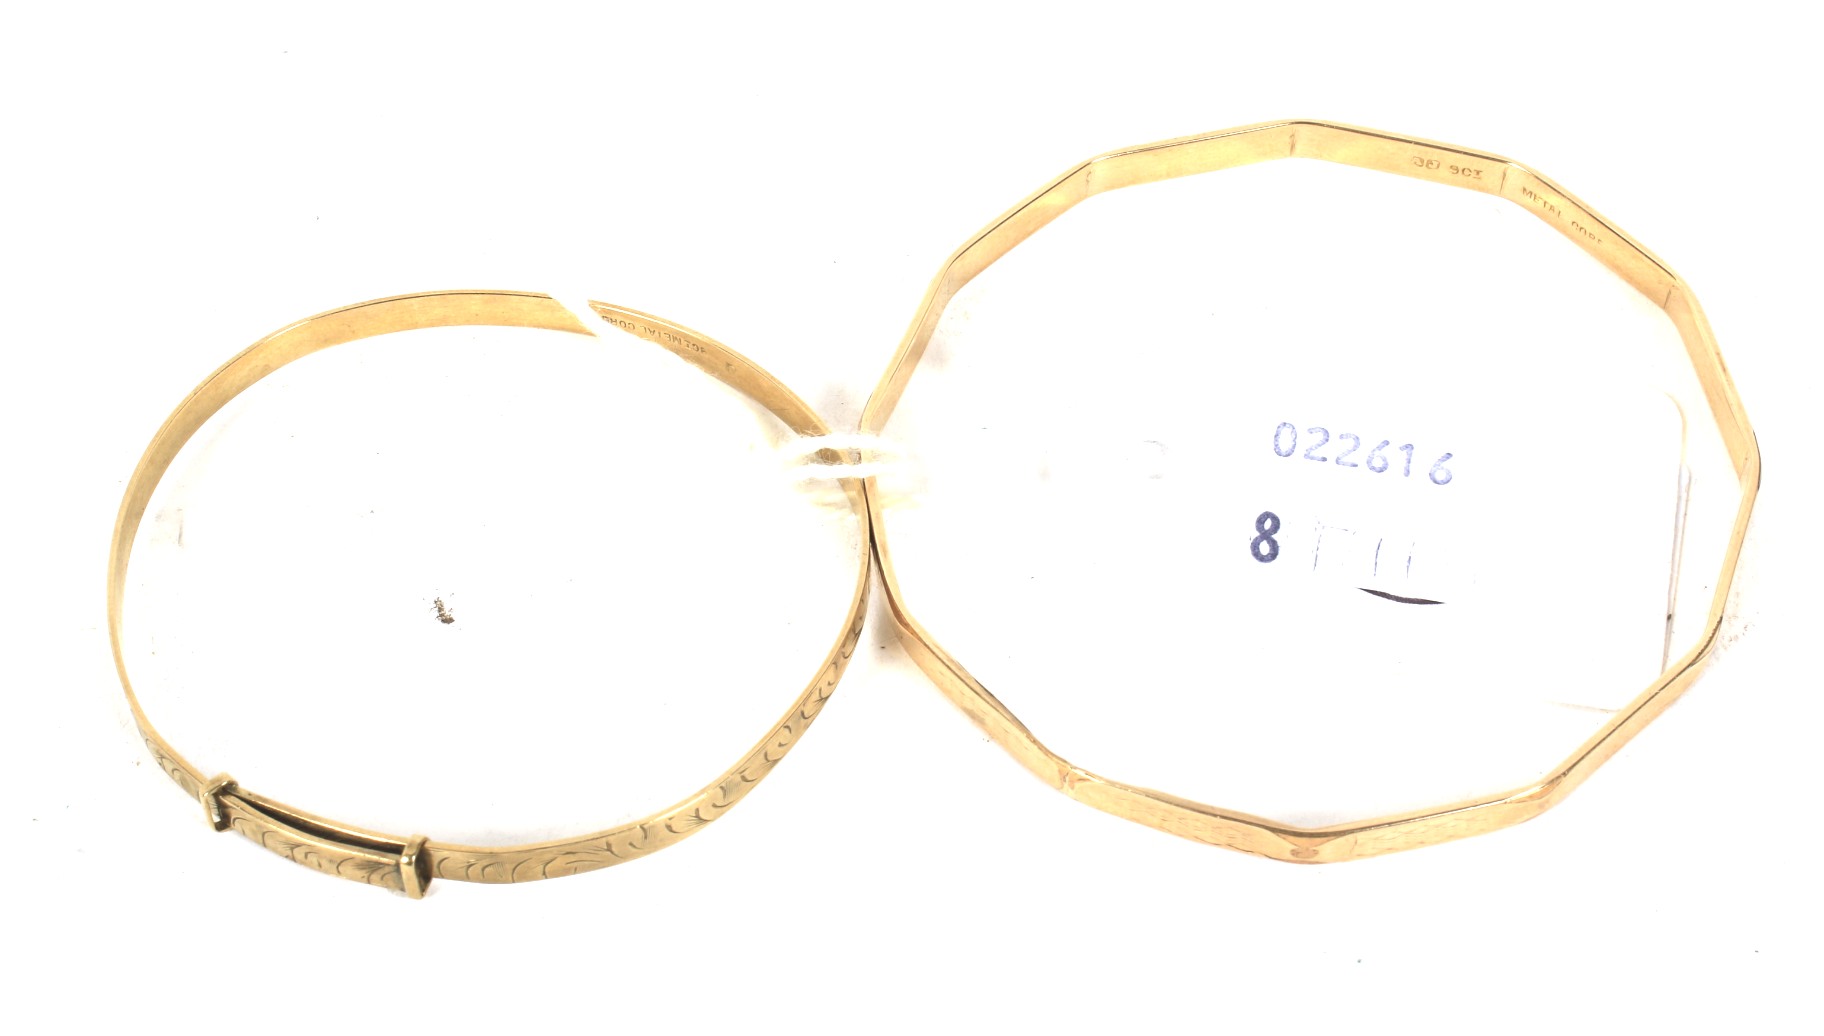 Two vintage ladies 9ct gold plated bangles. Both with metal core and engraved decoration, 12. - Image 3 of 3